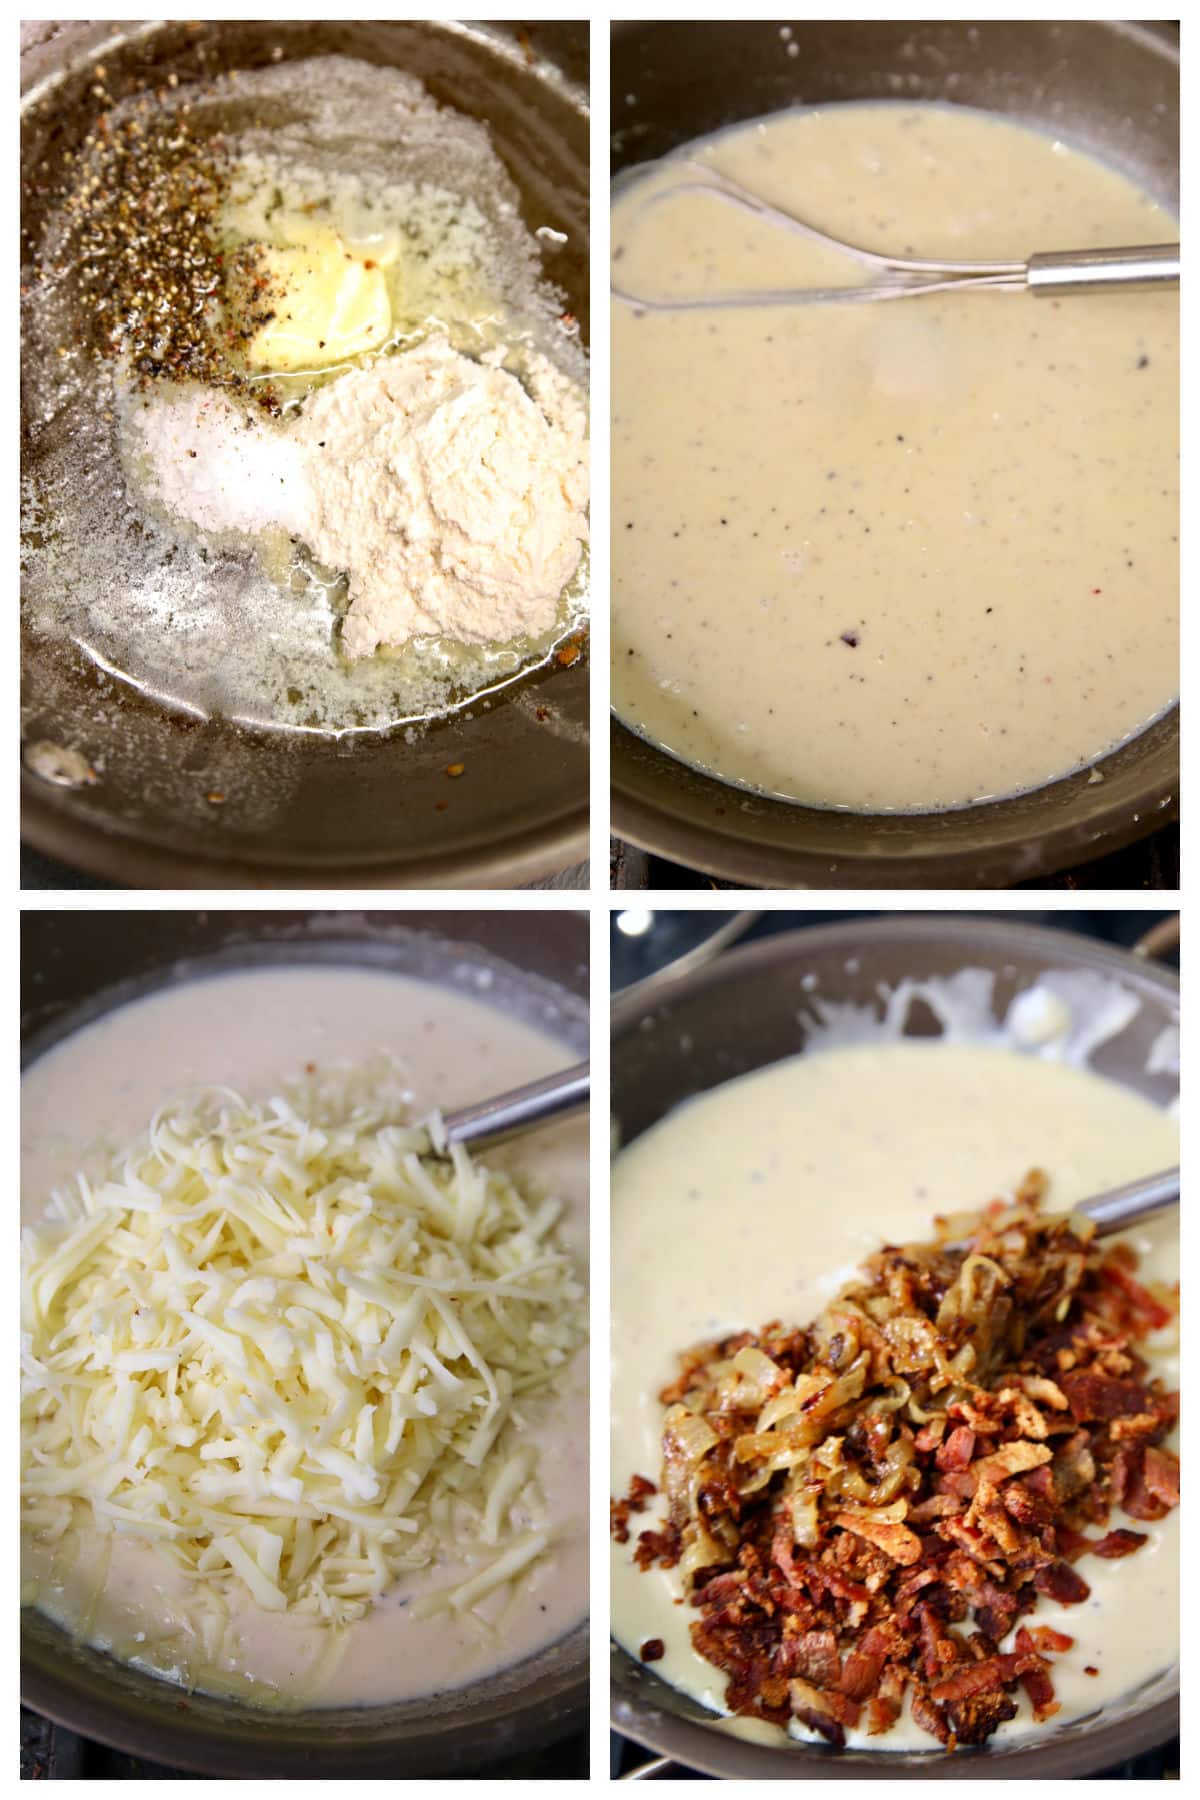 Making cheese sauce with bacon and onions for macaroni - collage.